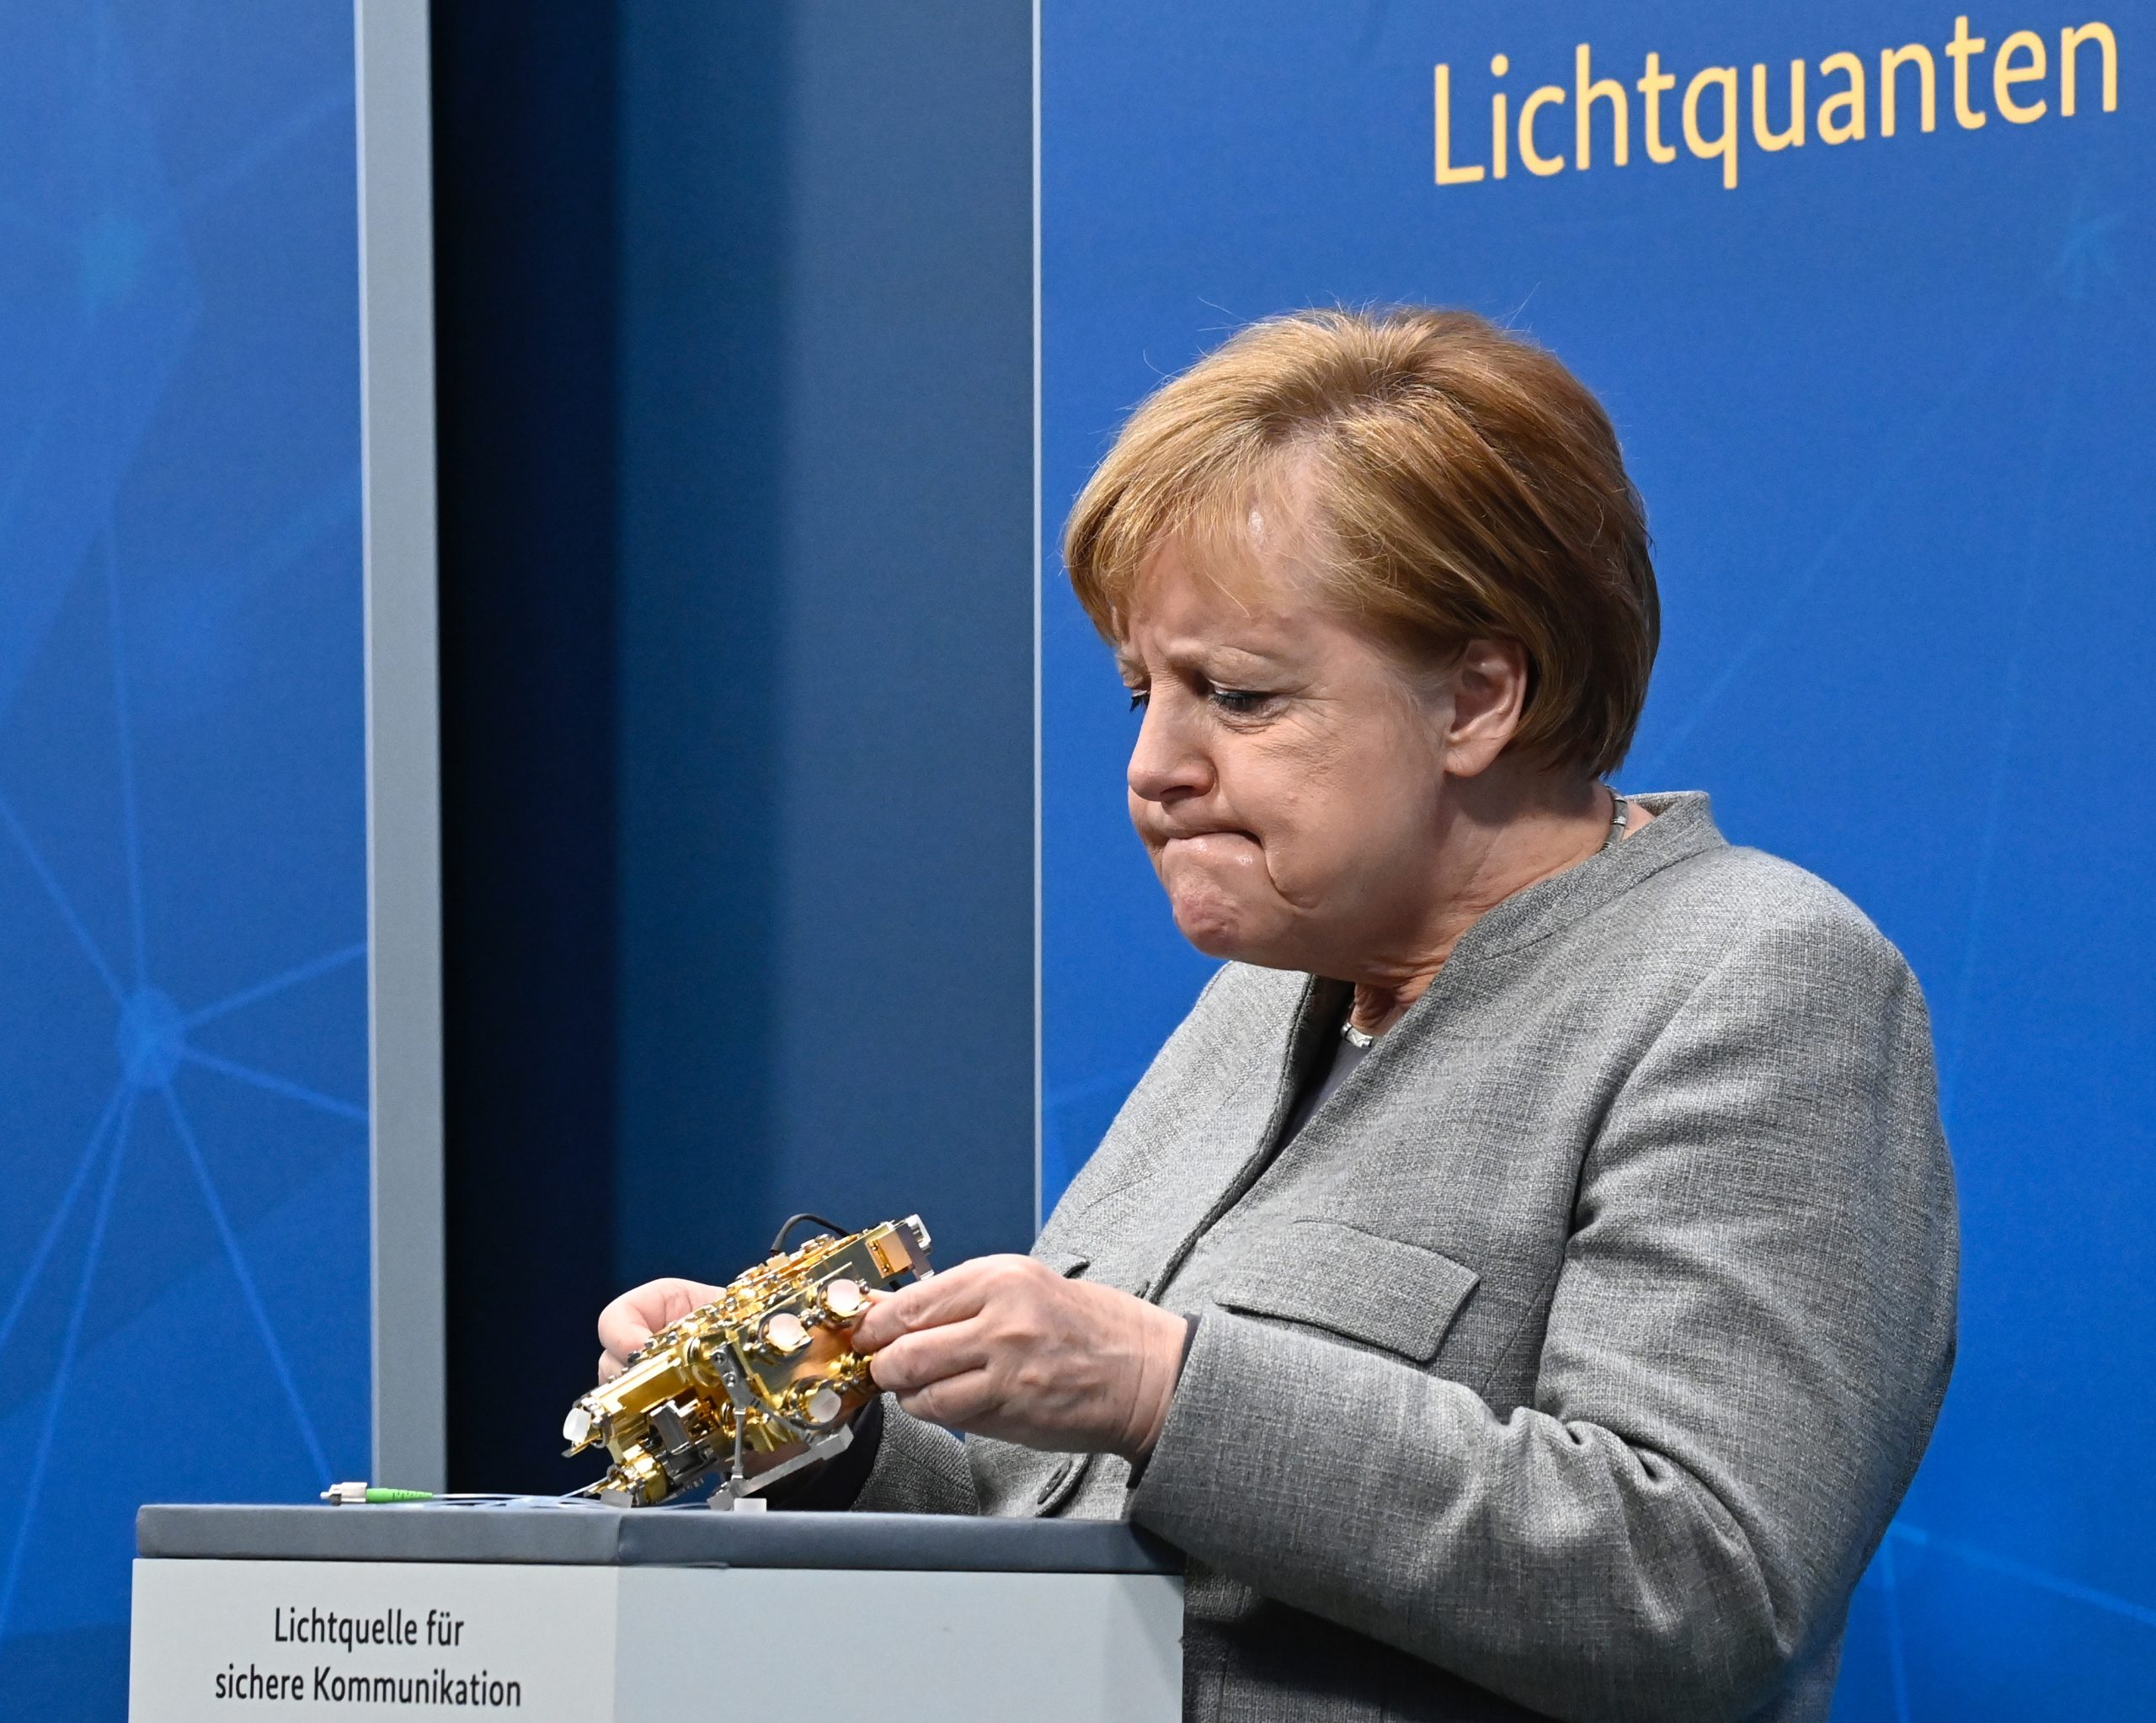 epa08854642 German Chancellor Angela Merkel looks at a light engine for secure communication as she takes part in the virtual Digital Summit 2020 at the Chancellery in Berlin, Germany, 01 December 2020.  EPA/TOBIAS SCHWARZ / POOL